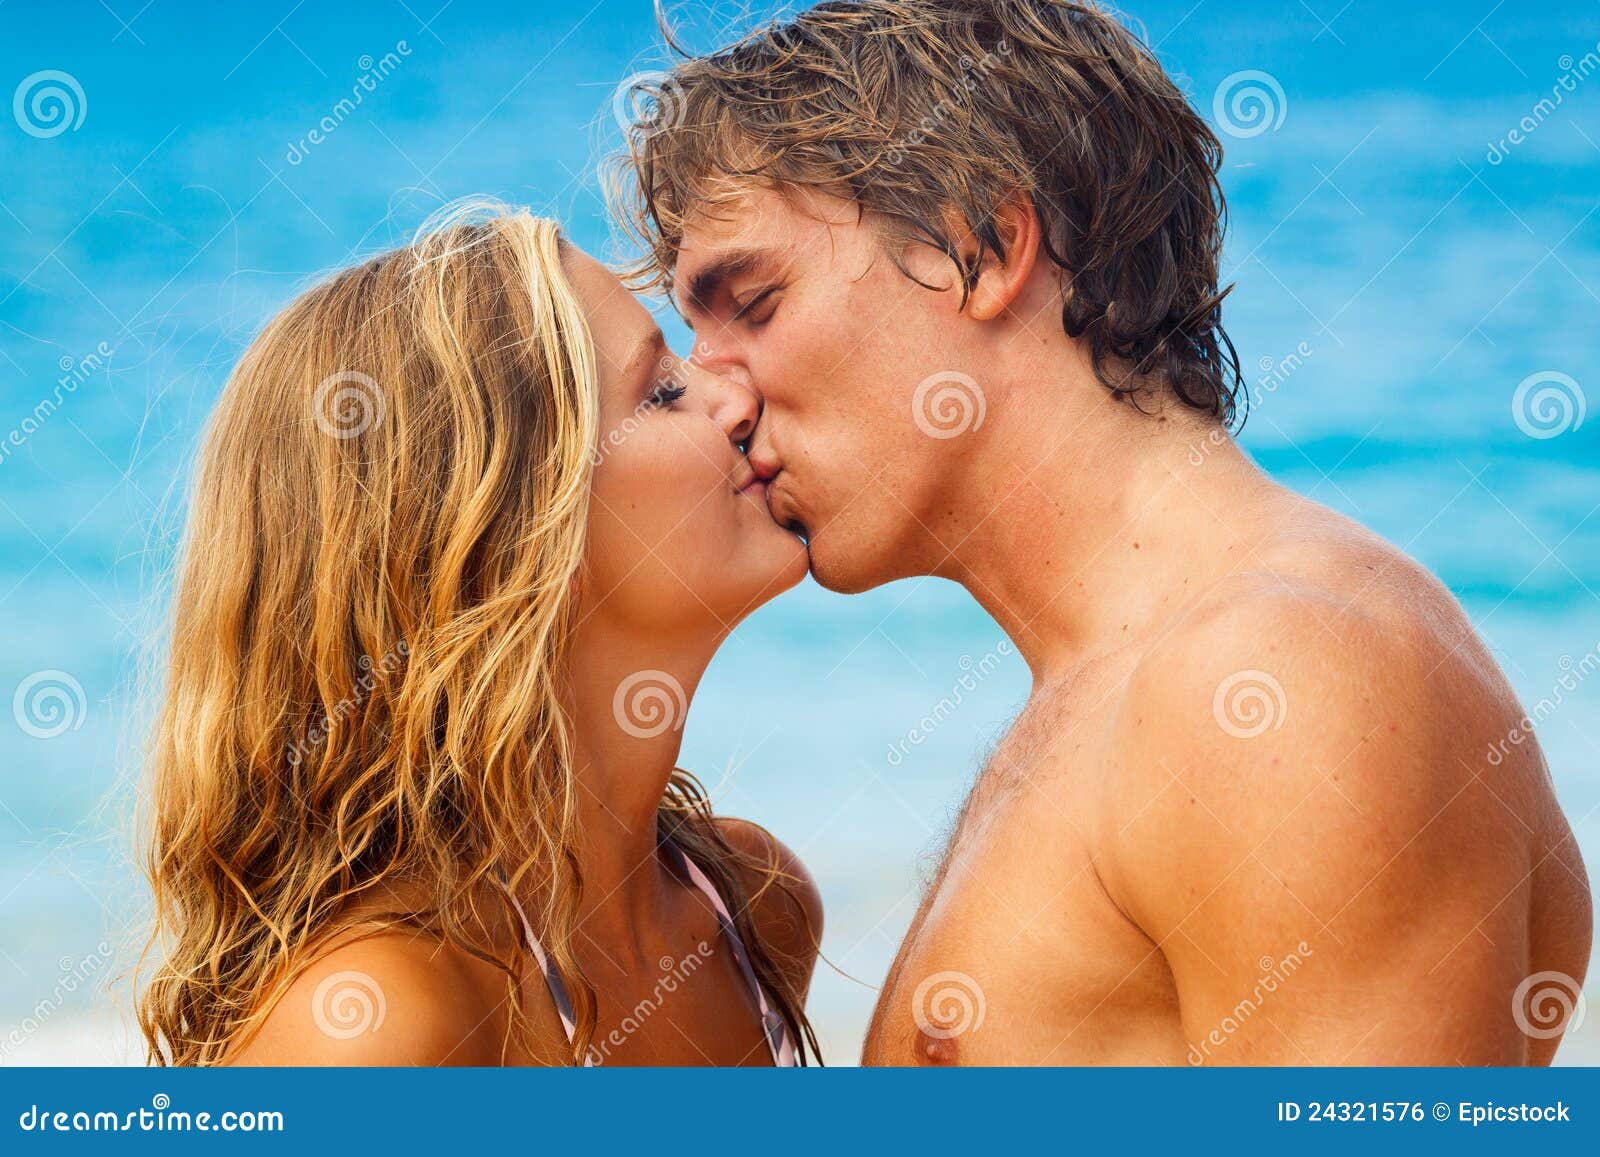 caroline stoddart recommends Kissing On The Beach